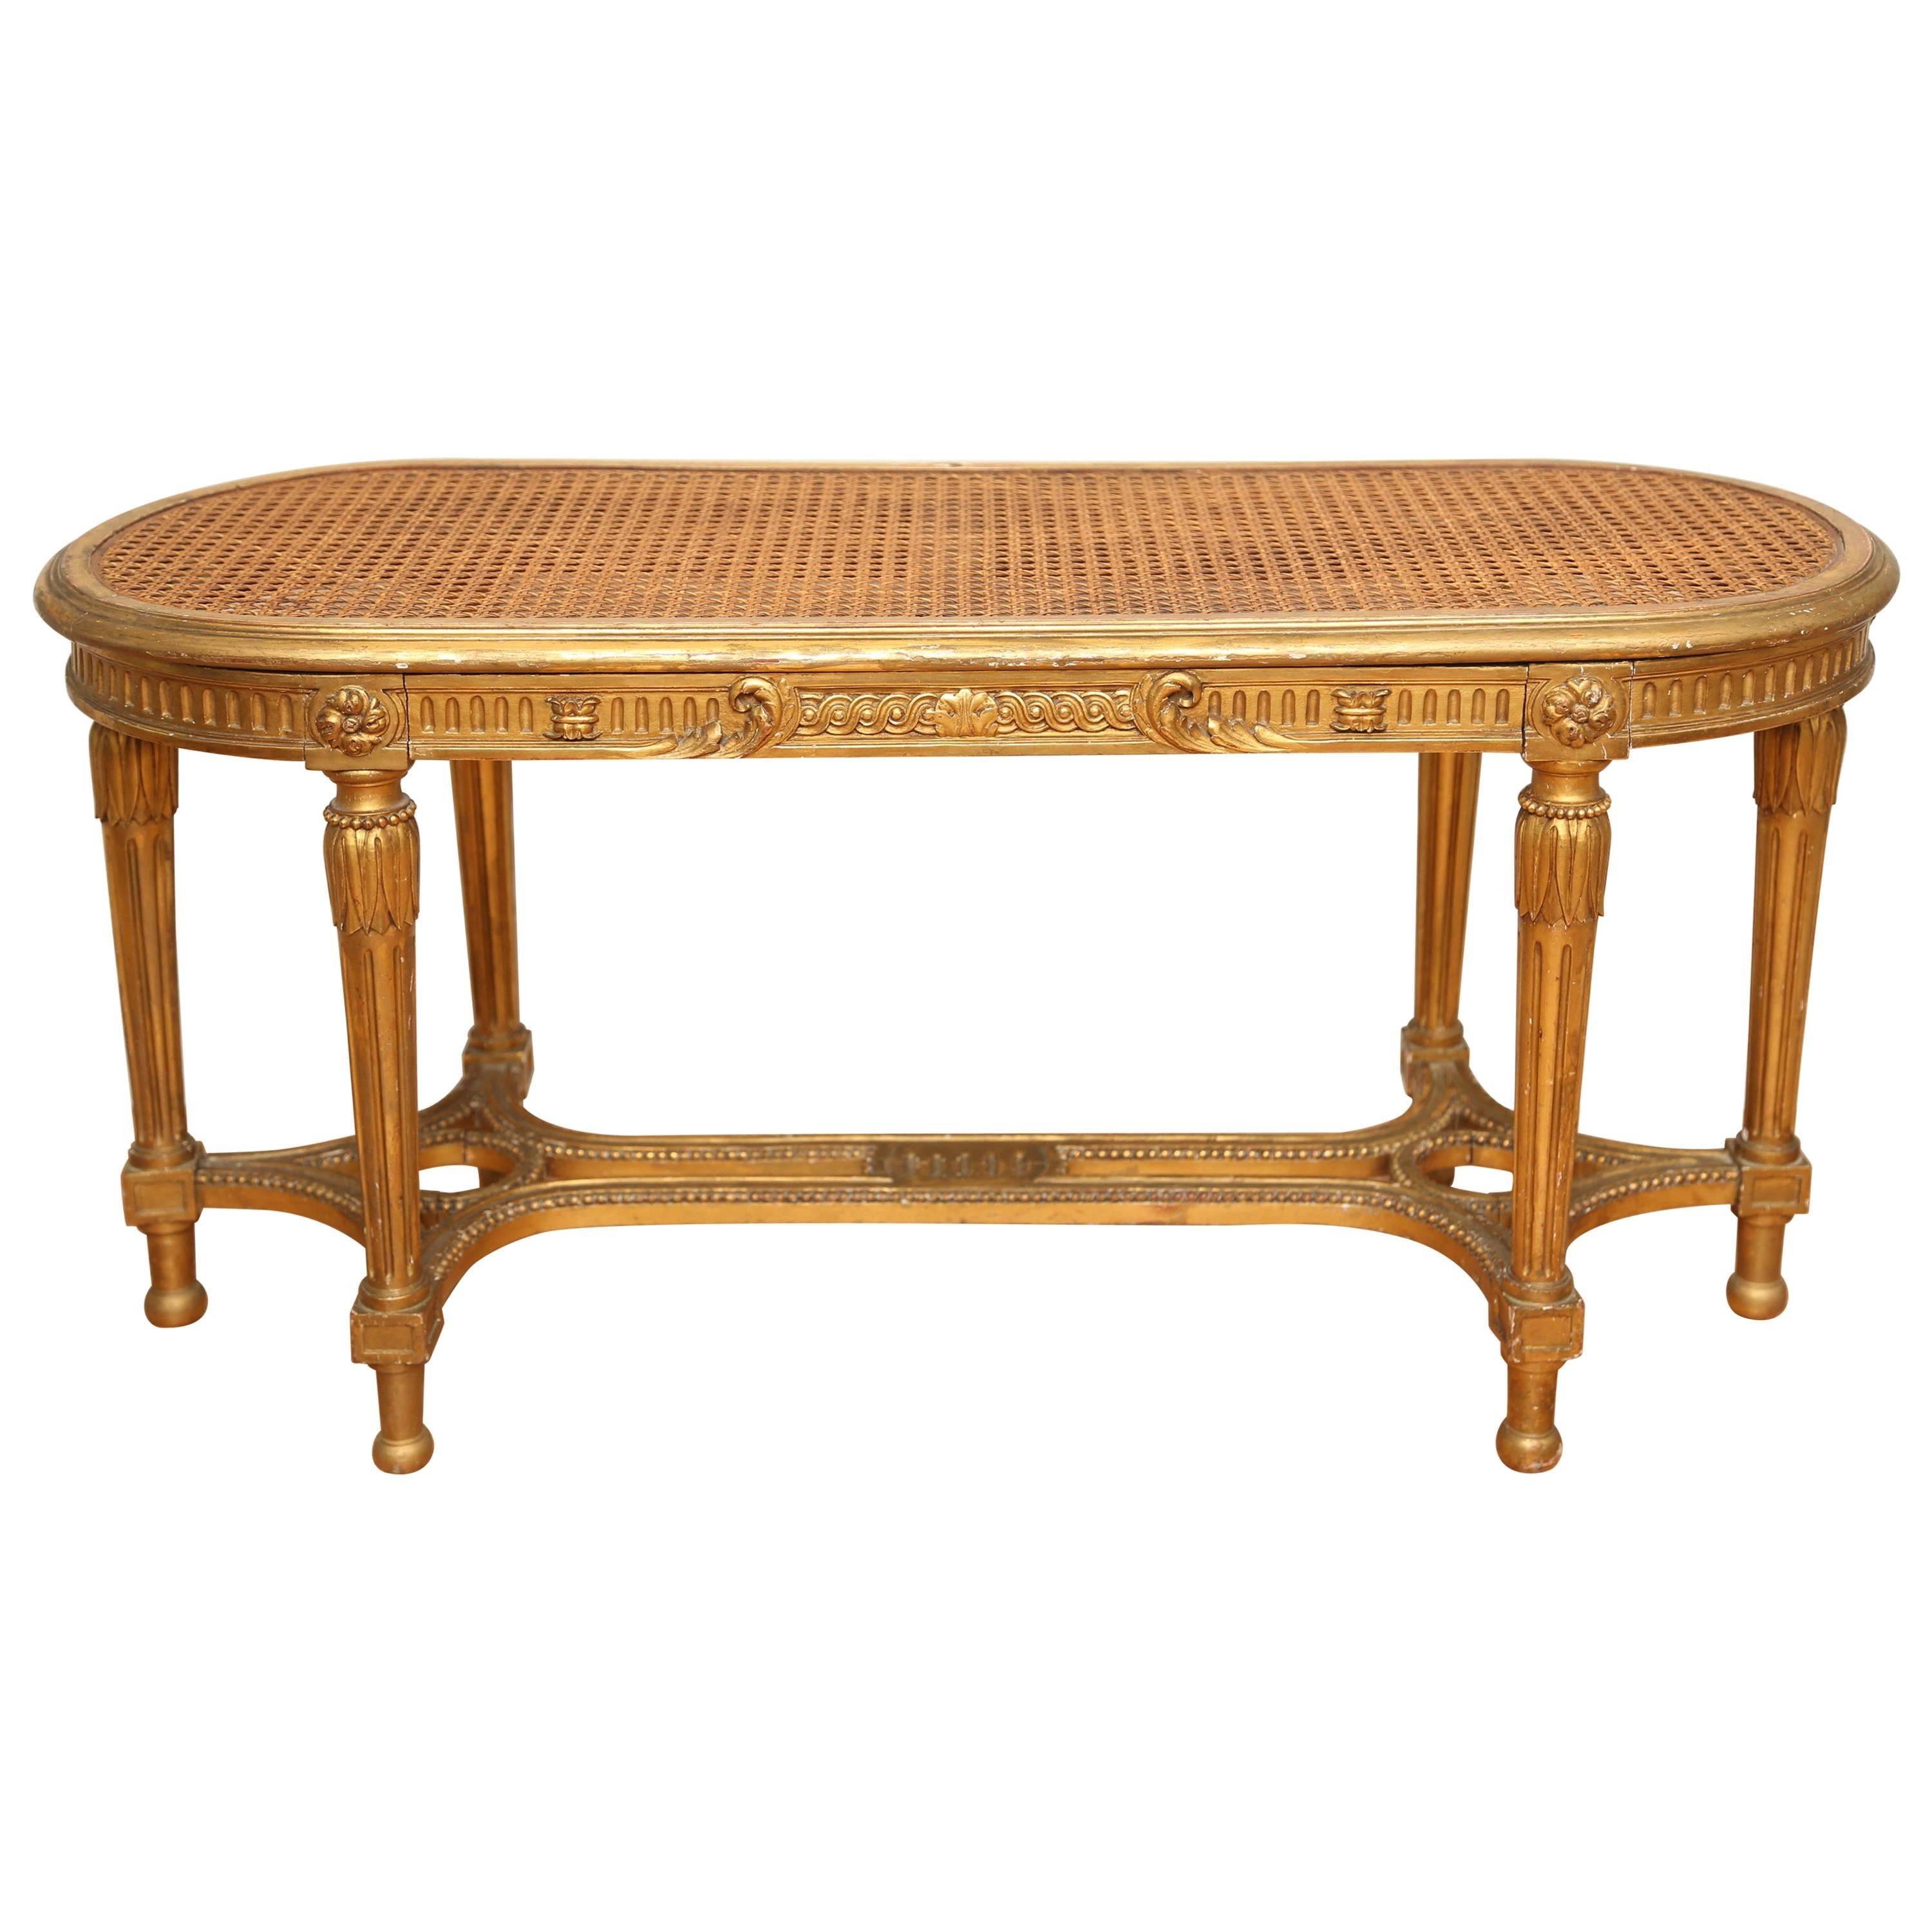 19th Century French Oval Gilded Bench